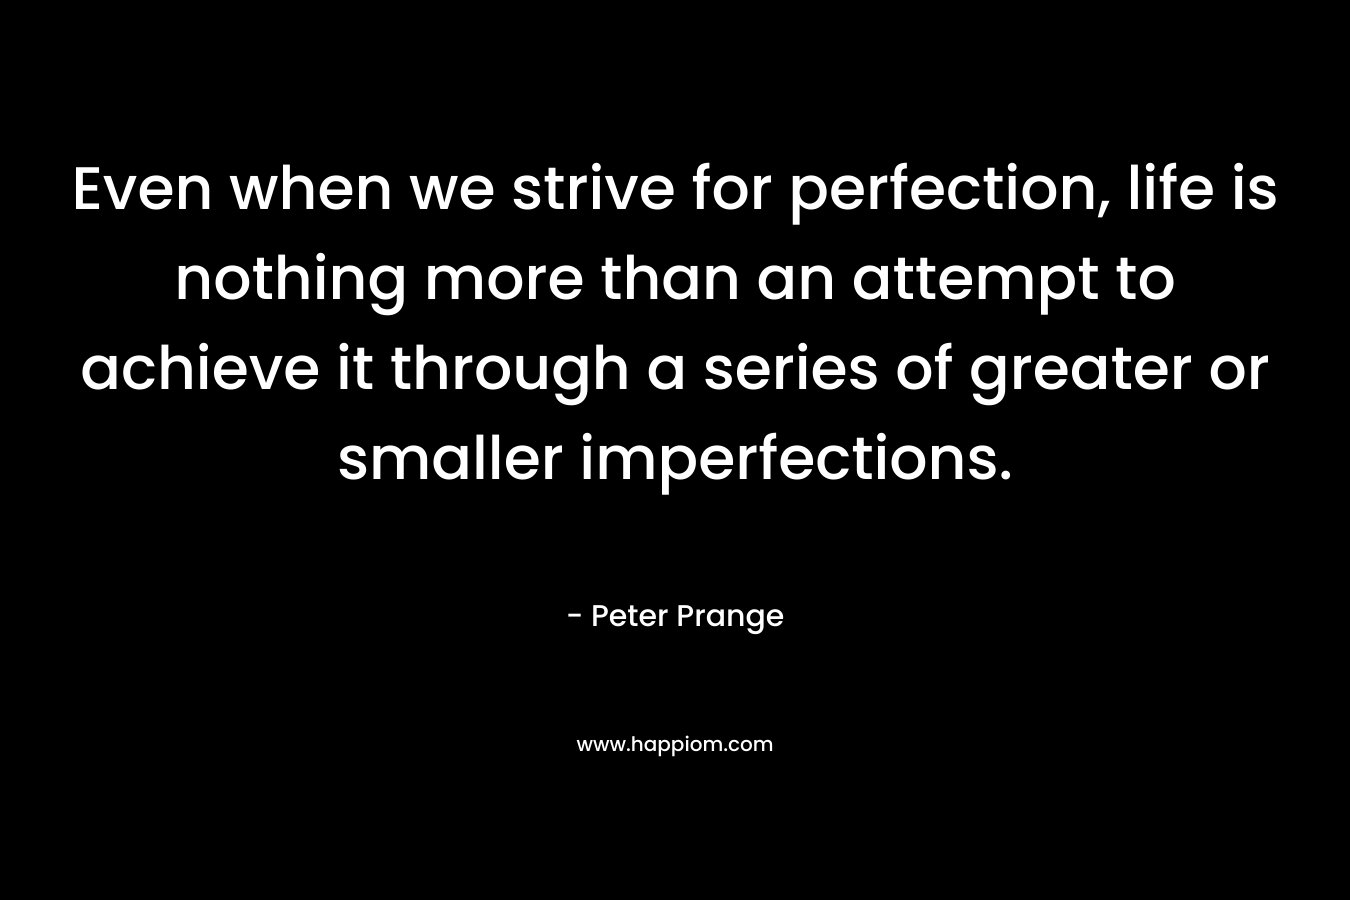 Even when we strive for perfection, life is nothing more than an attempt to achieve it through a series of greater or smaller imperfections. – Peter Prange